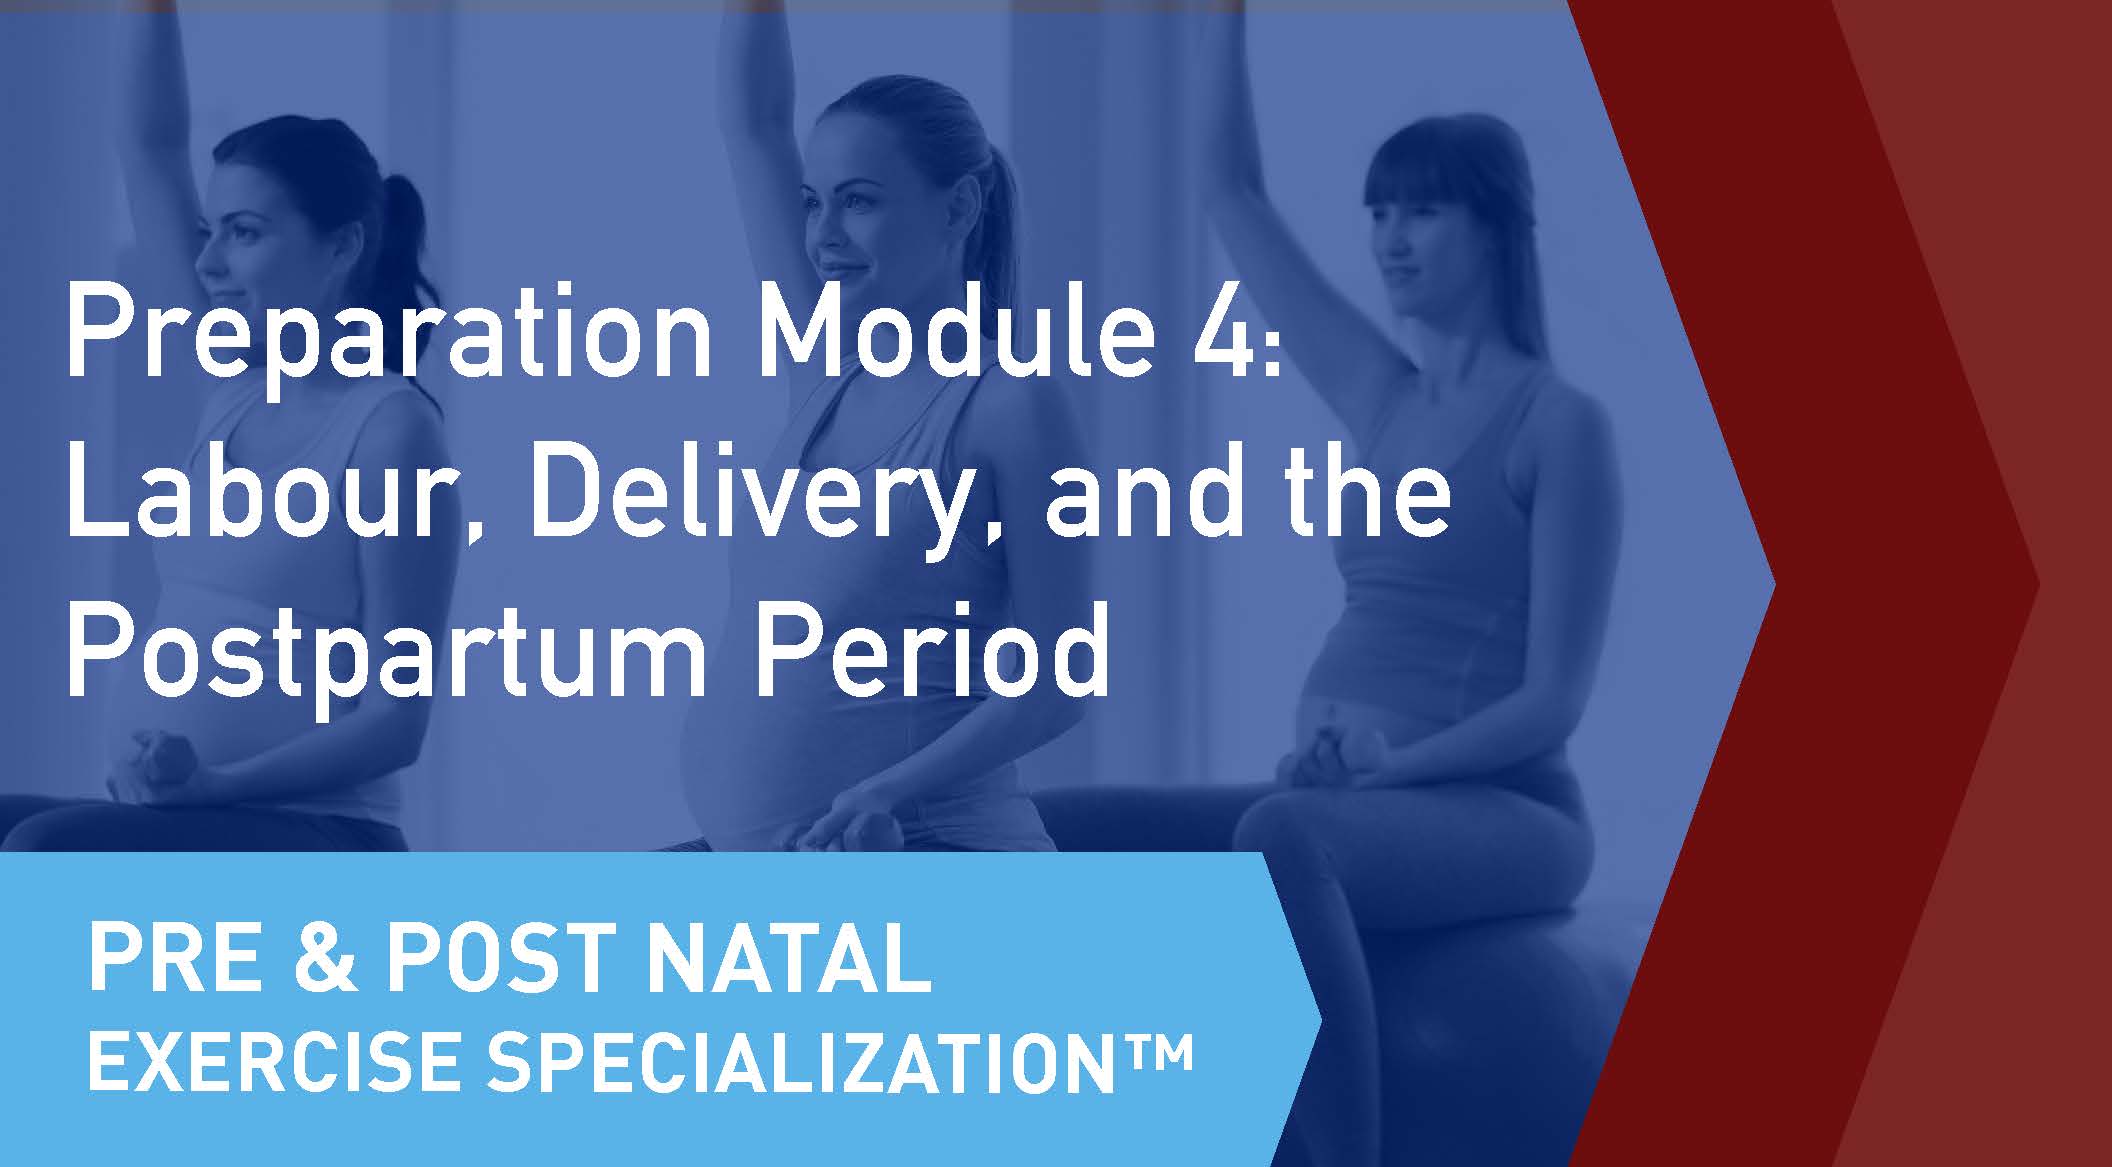 The online learning module cover of the CSEP Pre and Postnatal Exercise Specialization Preparation Module 4